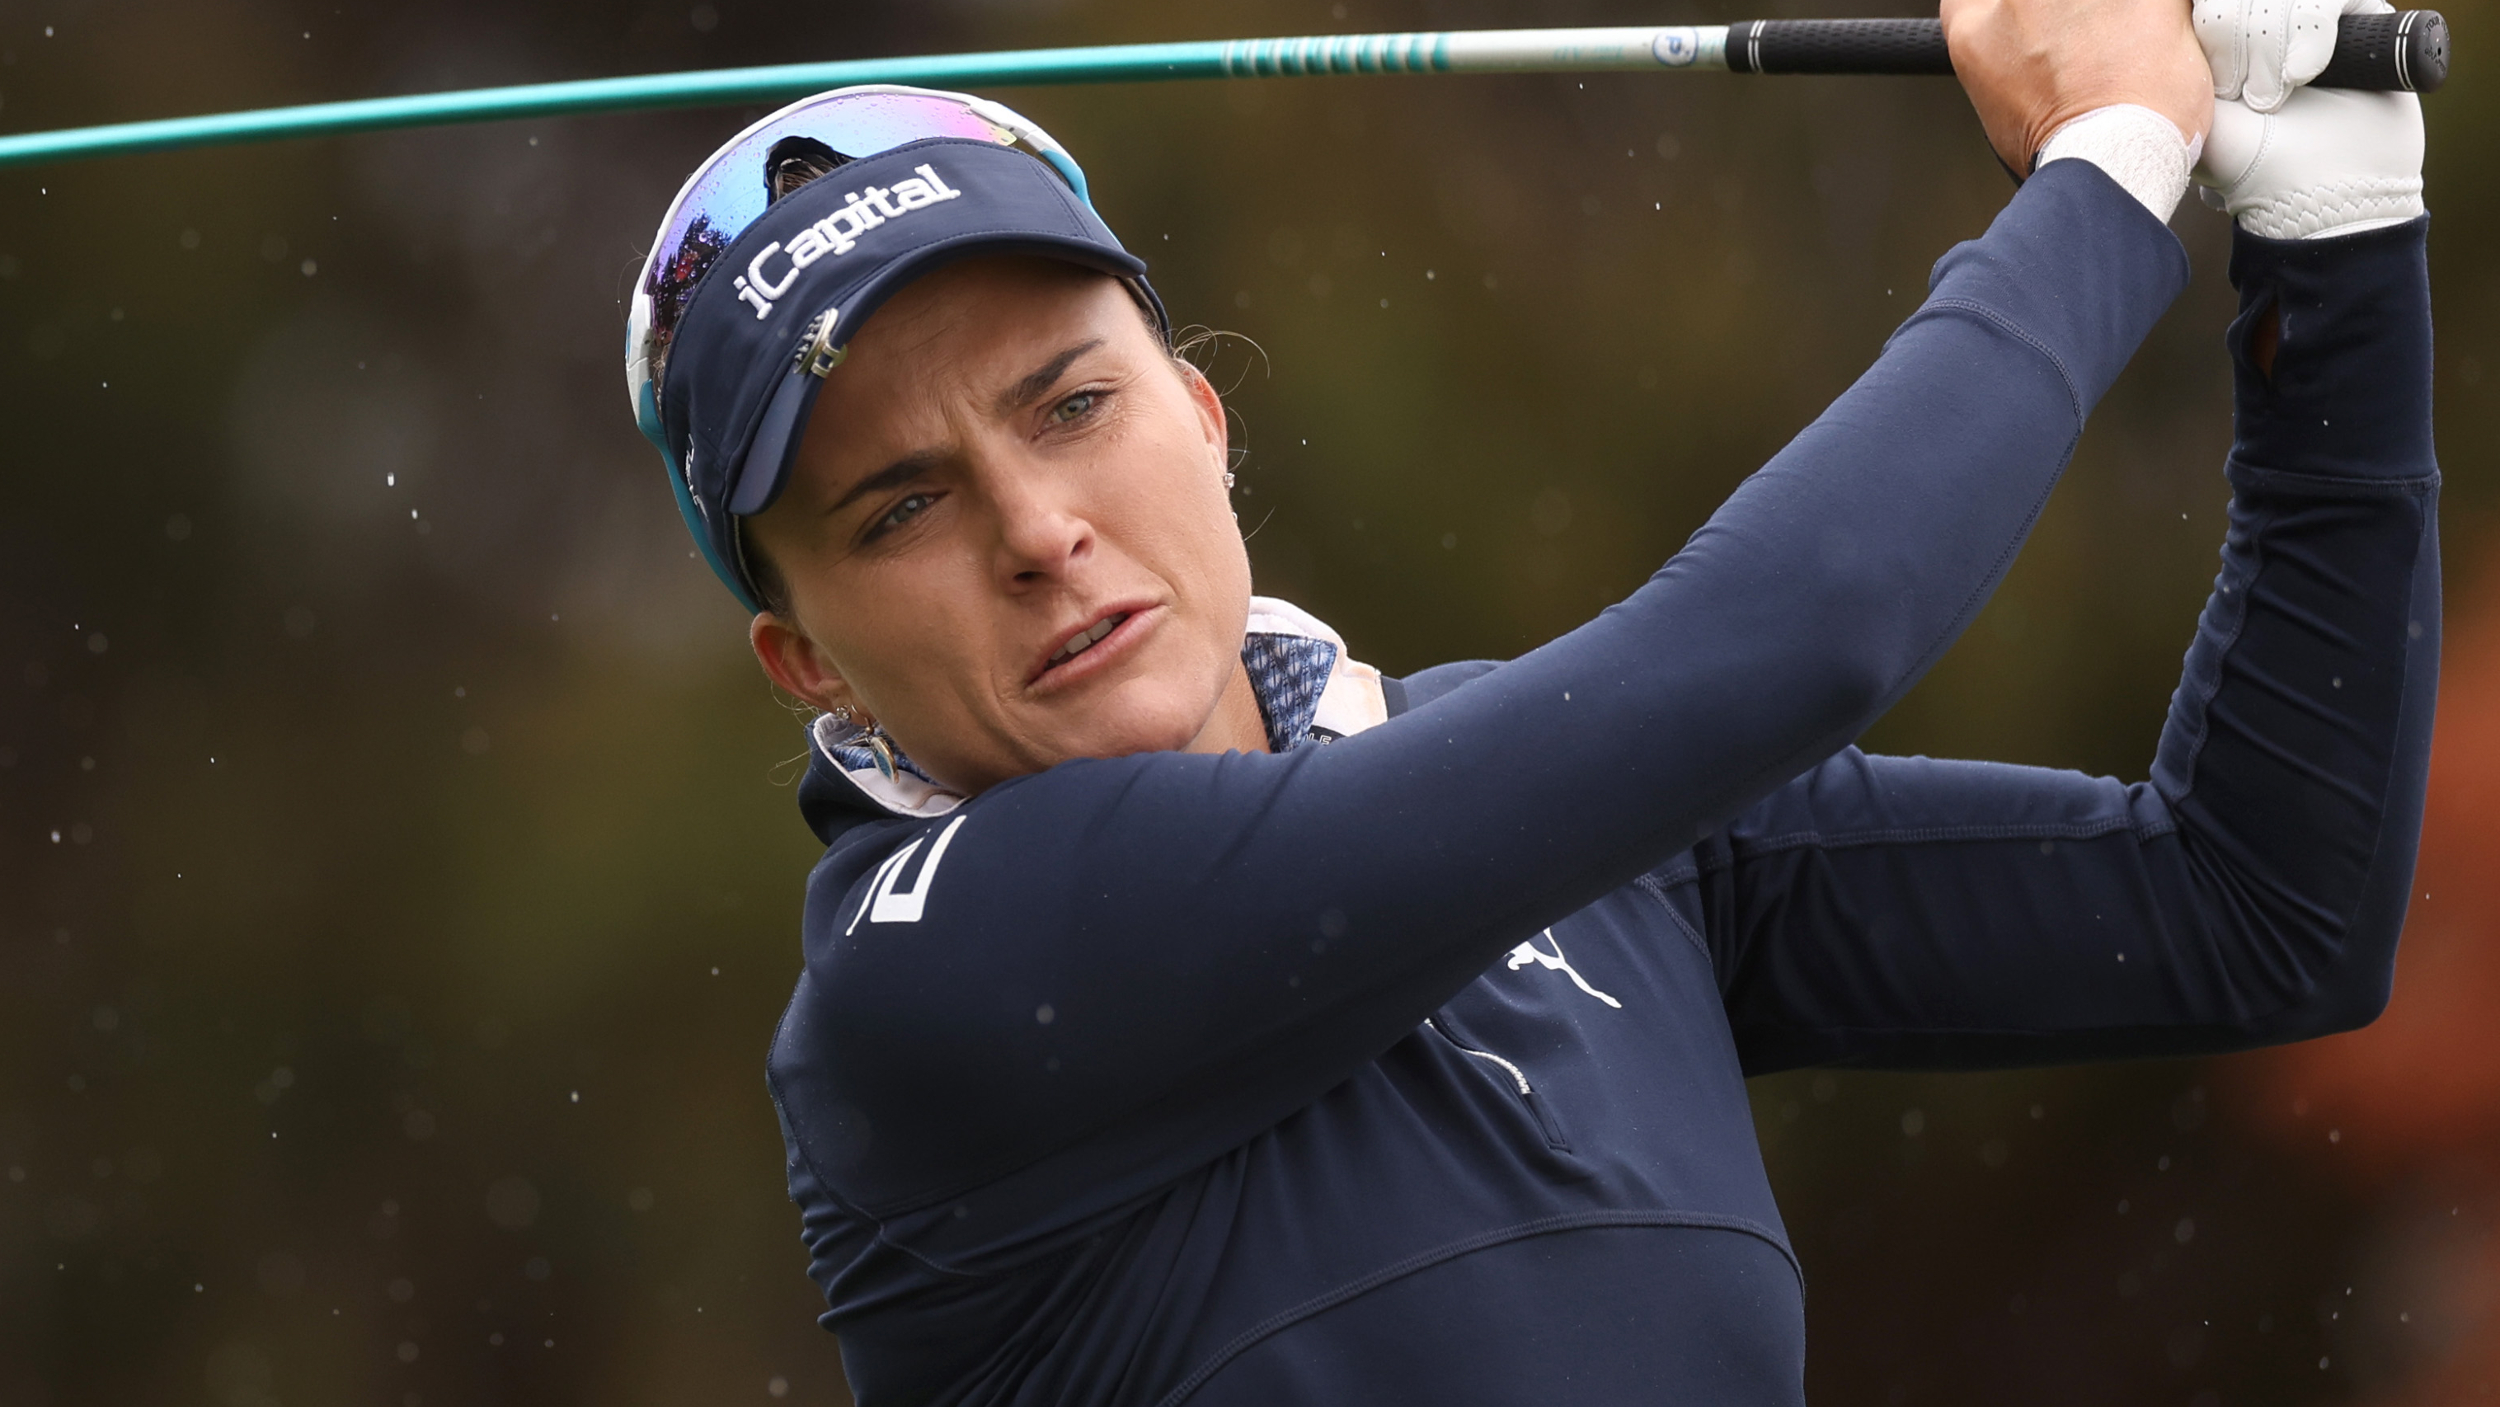 Lexi Thompson takes a tee shot at the Ford Championship